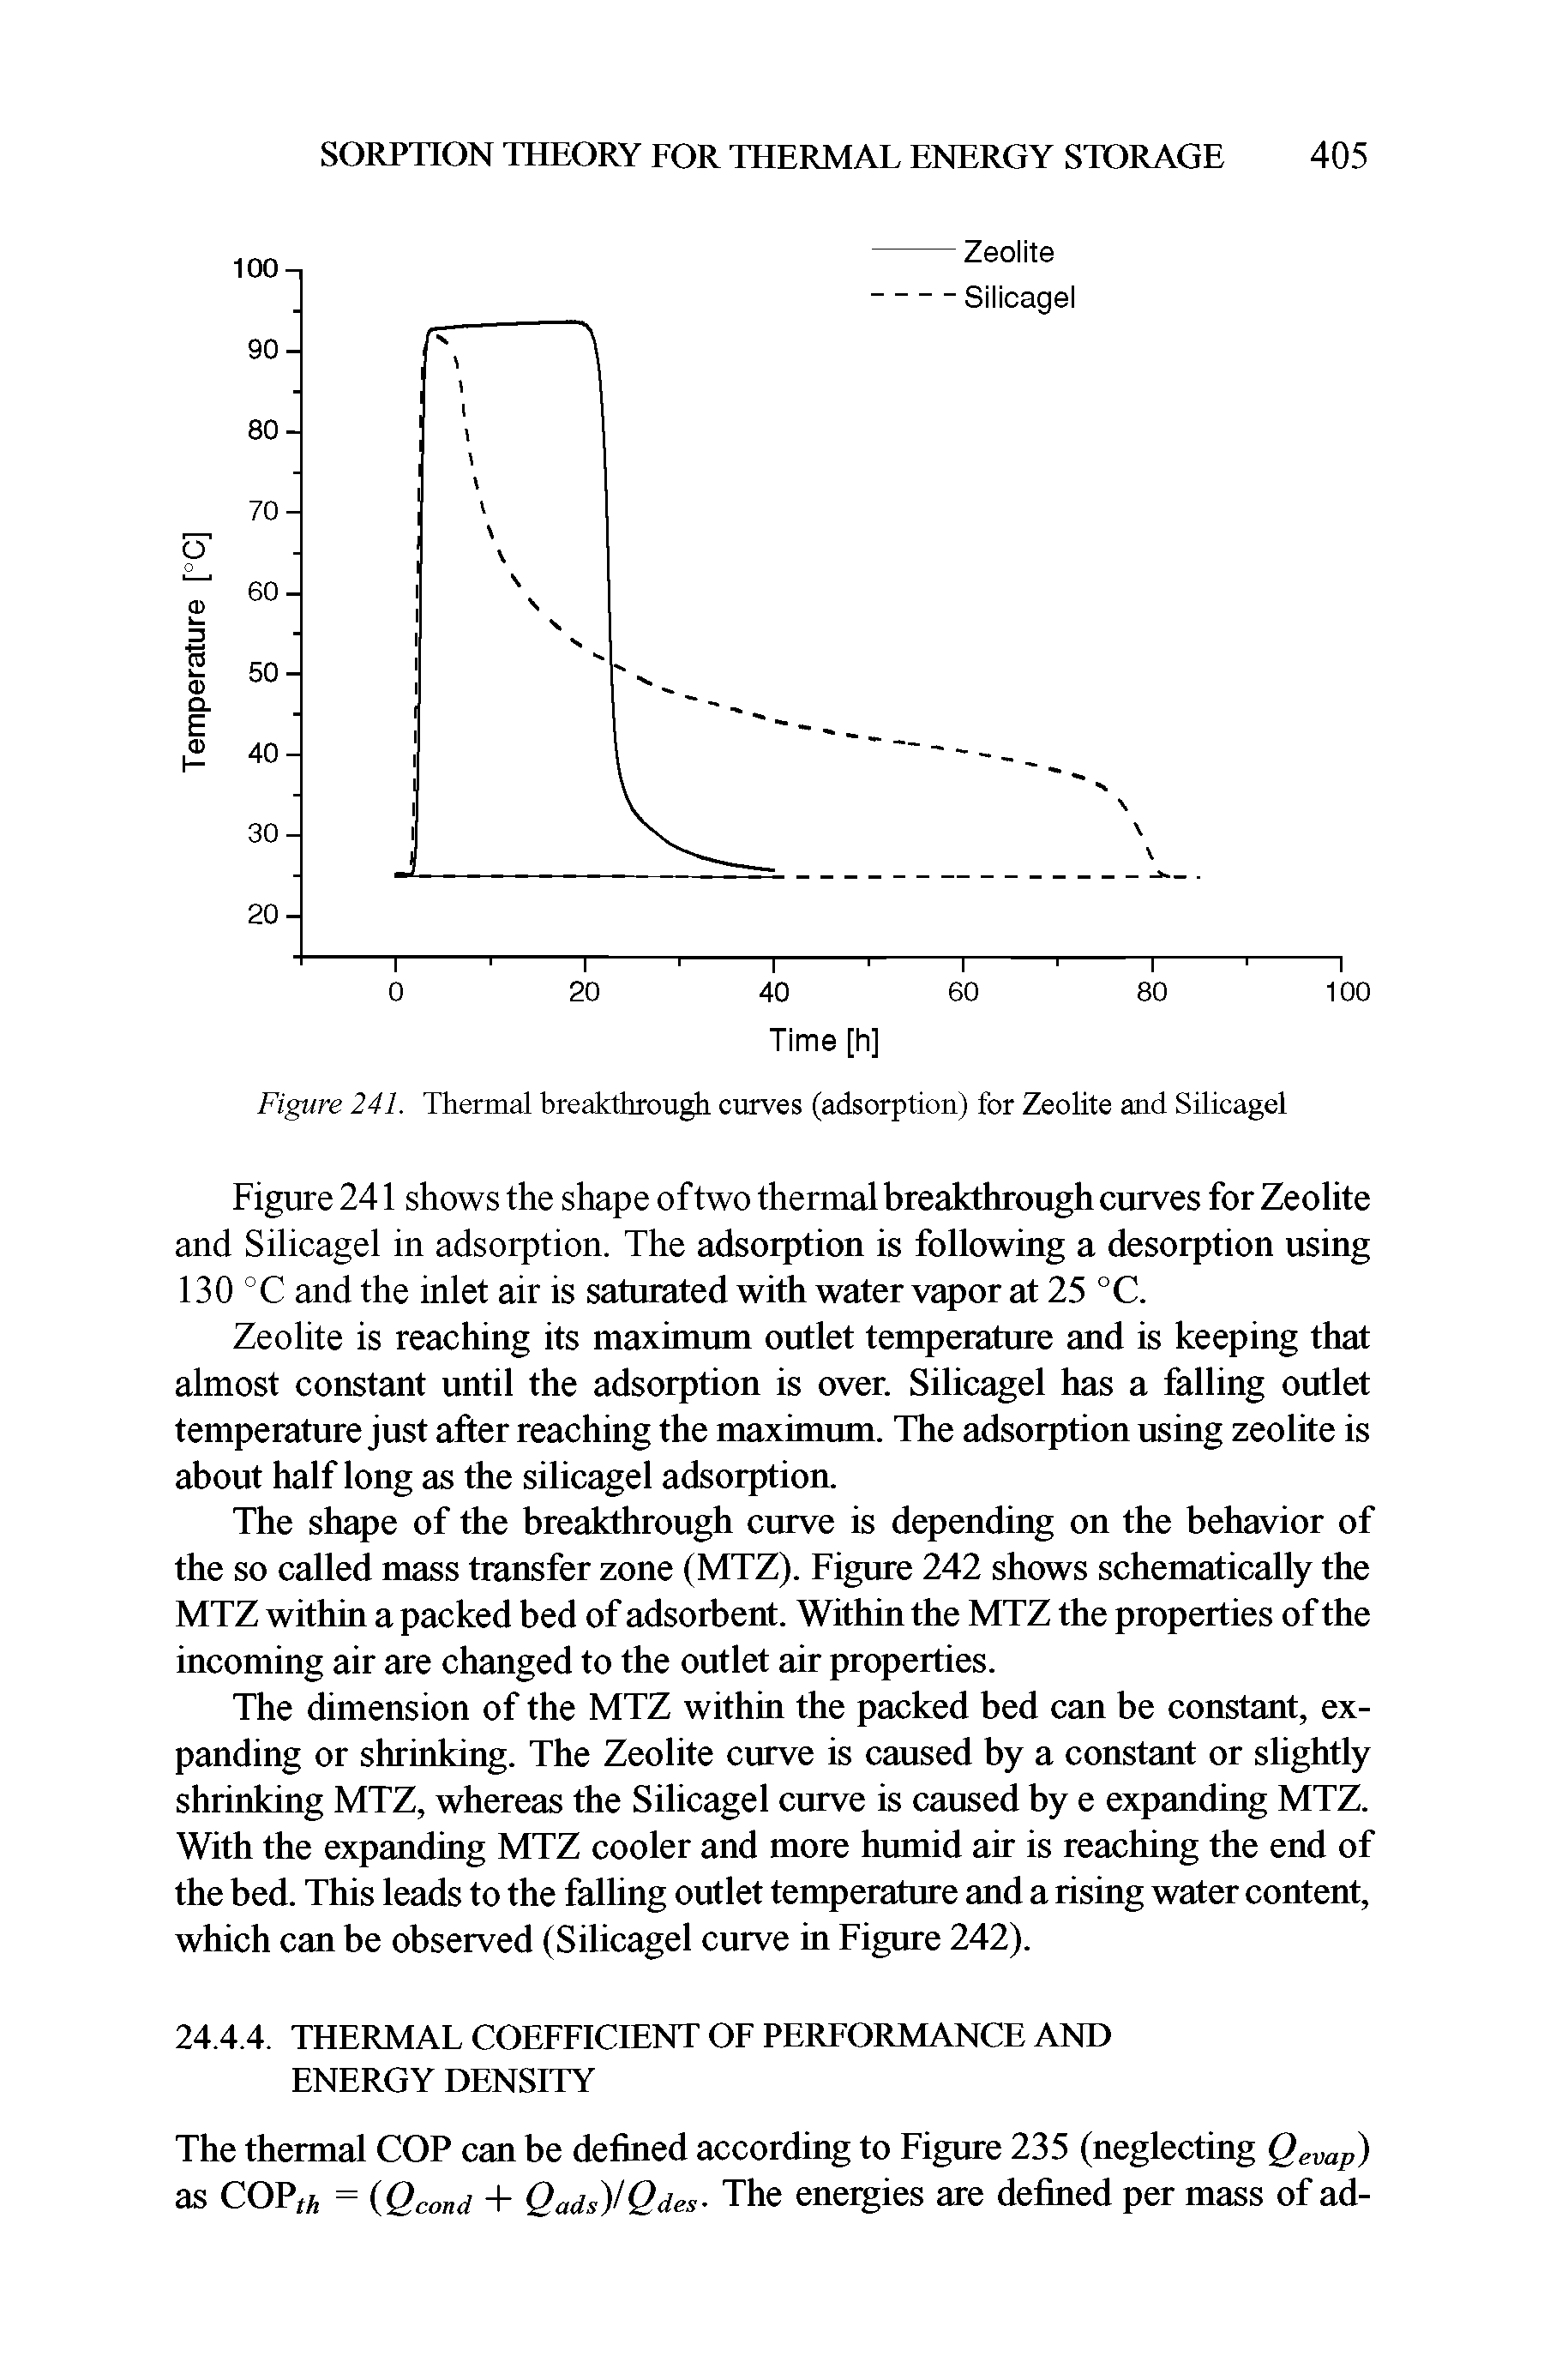 Figure 241. Thermal breakthrough curves (adsorption) for Zeolite and Silicagel...